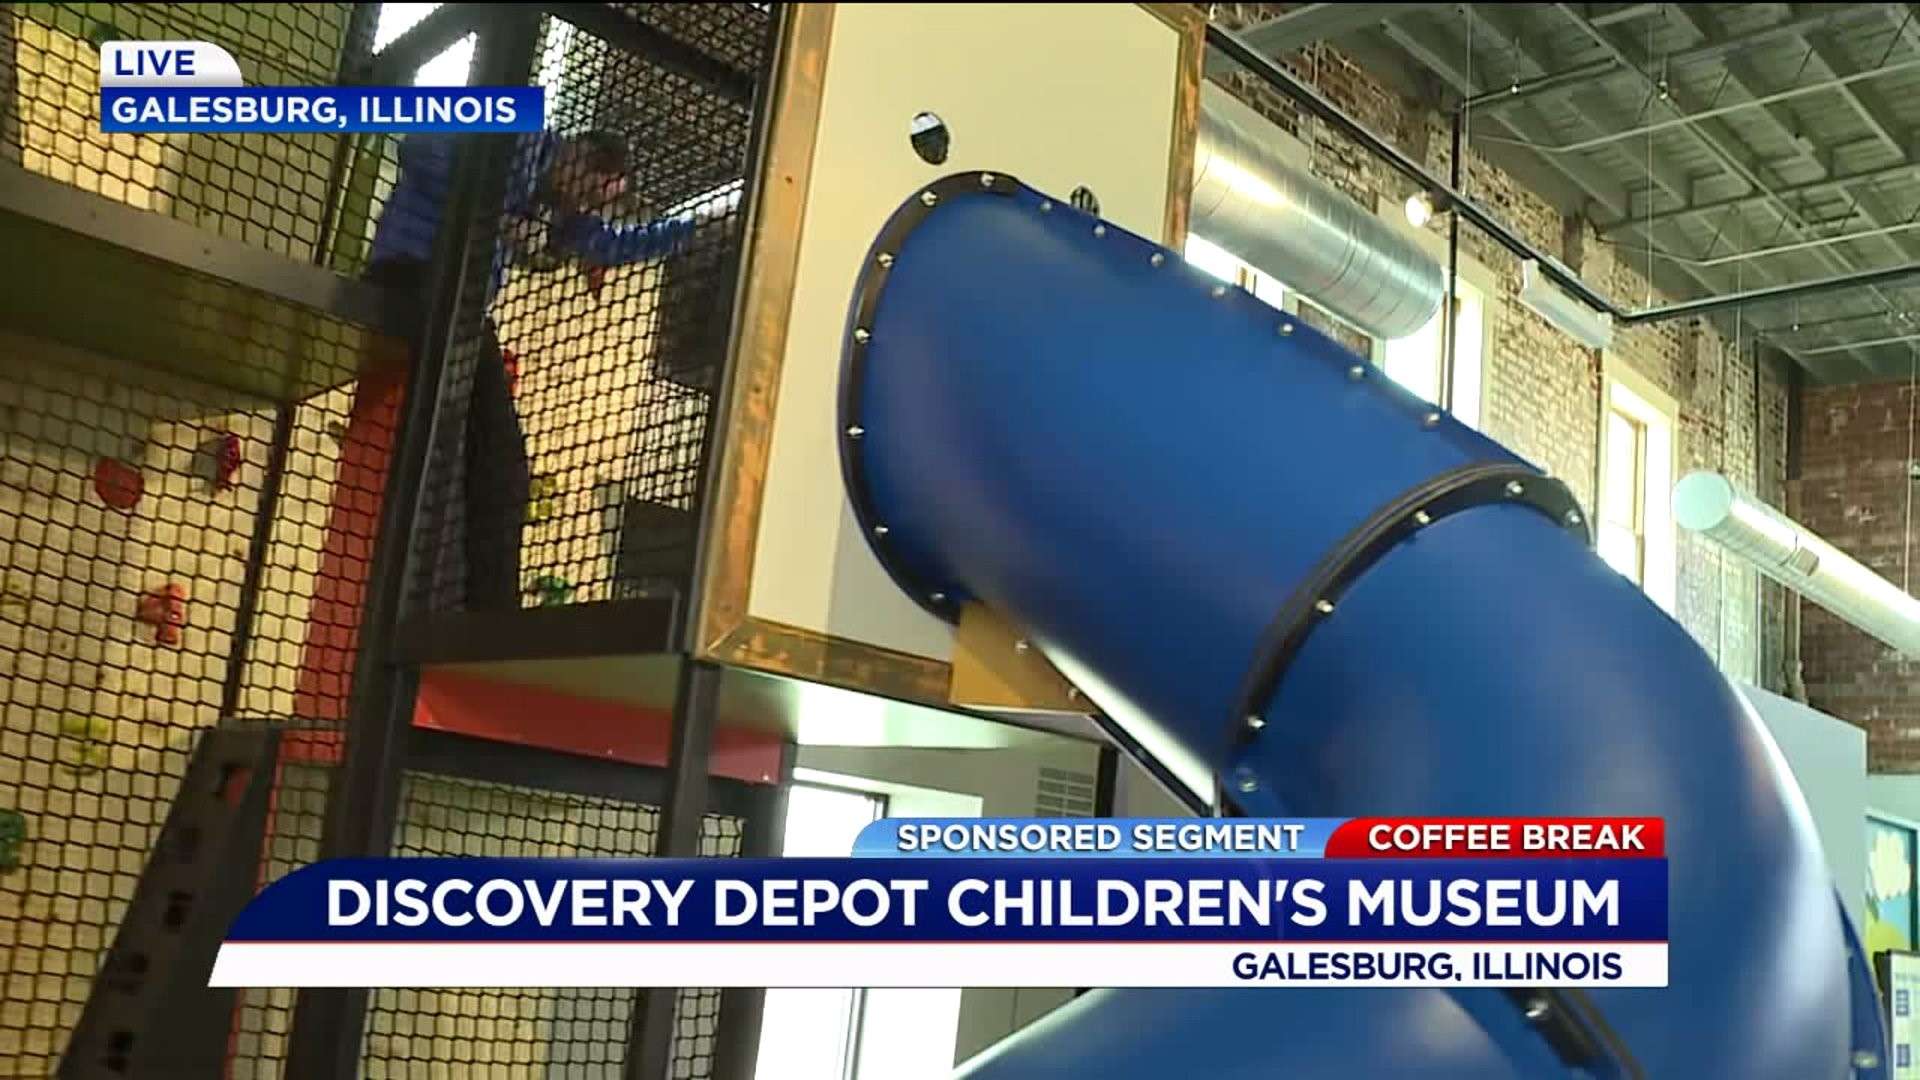 Jon Ketz tries the slide at Discovery Depot